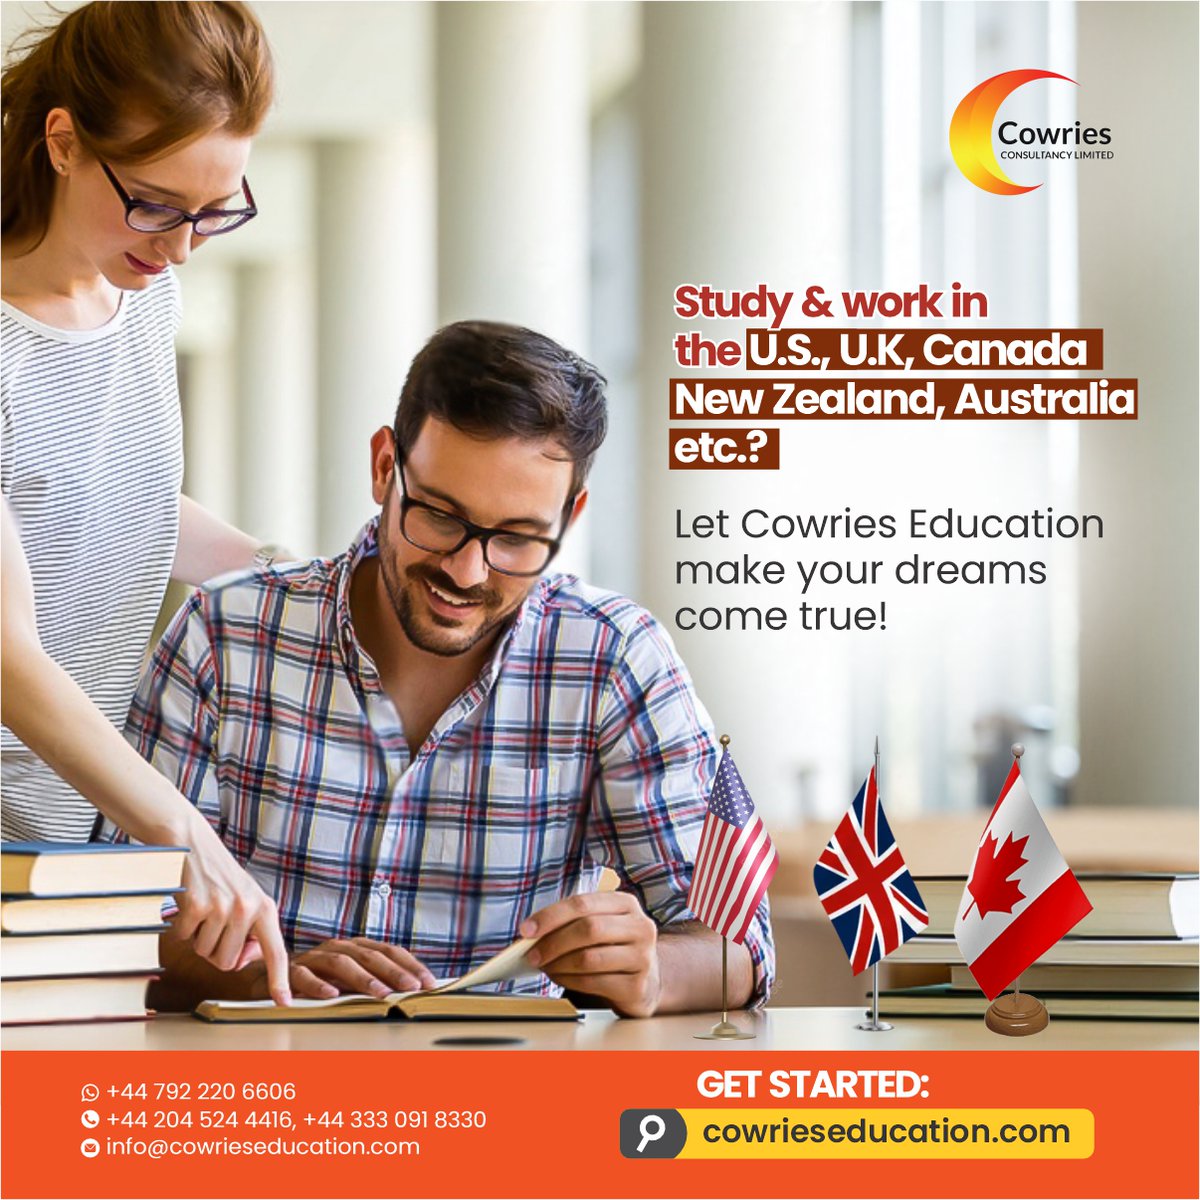 Turn your dreams of studying and working in the U.S., U.K., Canada, Australia, New Zealand & more into reality with Cowries Consultancy Ltd Learn more at cowrieseducation.com #StudyAbroad #WorkAndStudy #InternationalEducation #USUKCanada #DreamBigWithCowries #StudyInUSA